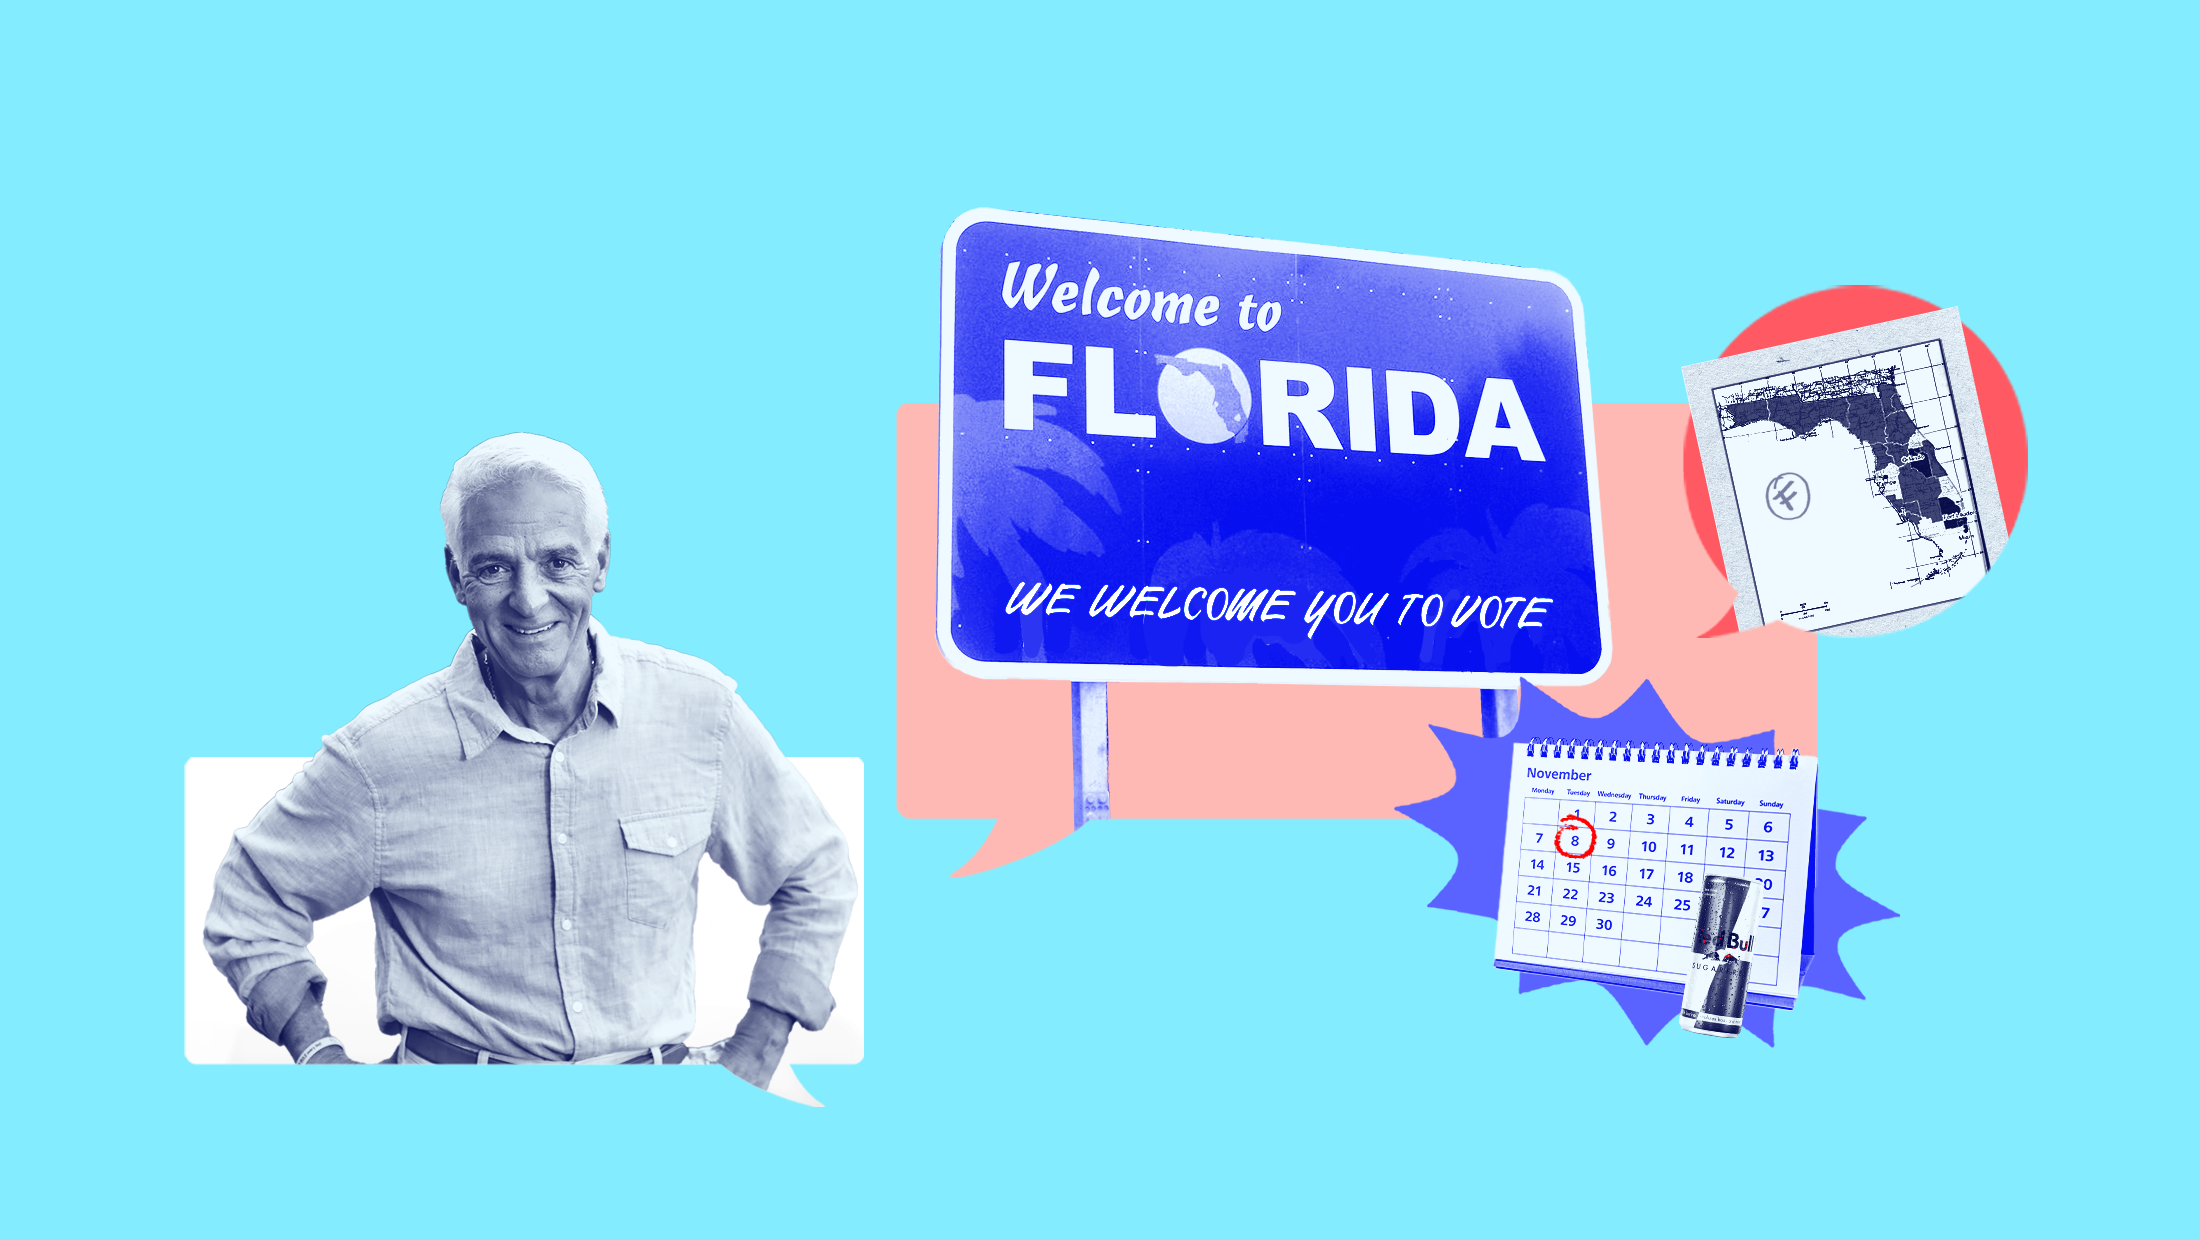 Light blue background with blue-toned image of Florida gubernatorial candidate Charlie Crist, a blue sign that reads "Welcome to Florida WE WELCOME YOU TO VOTE," a white map of Florida with an "F" stamped on top, a calendar with November 8 circled in red, and a Red Bull.